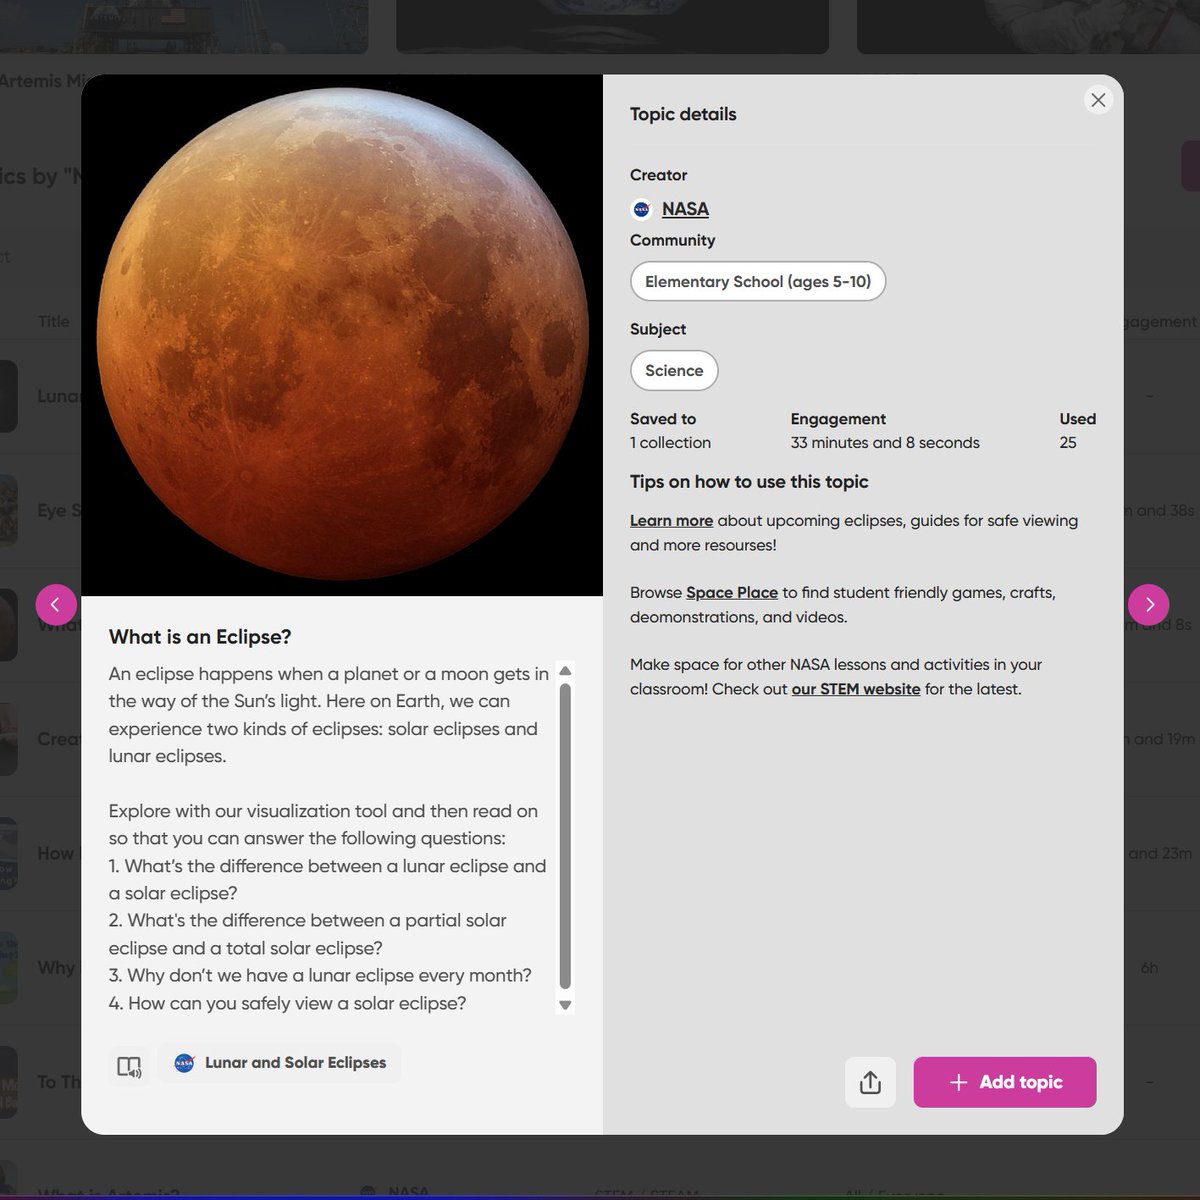 Keep the #Eclipse2024 learning going... and check out these incredible @MicrosoftFlip topics from @NASA inside the Discovery Library! 🌞🌚 Find NASA topics at: admin.flip.com/manage/discove…